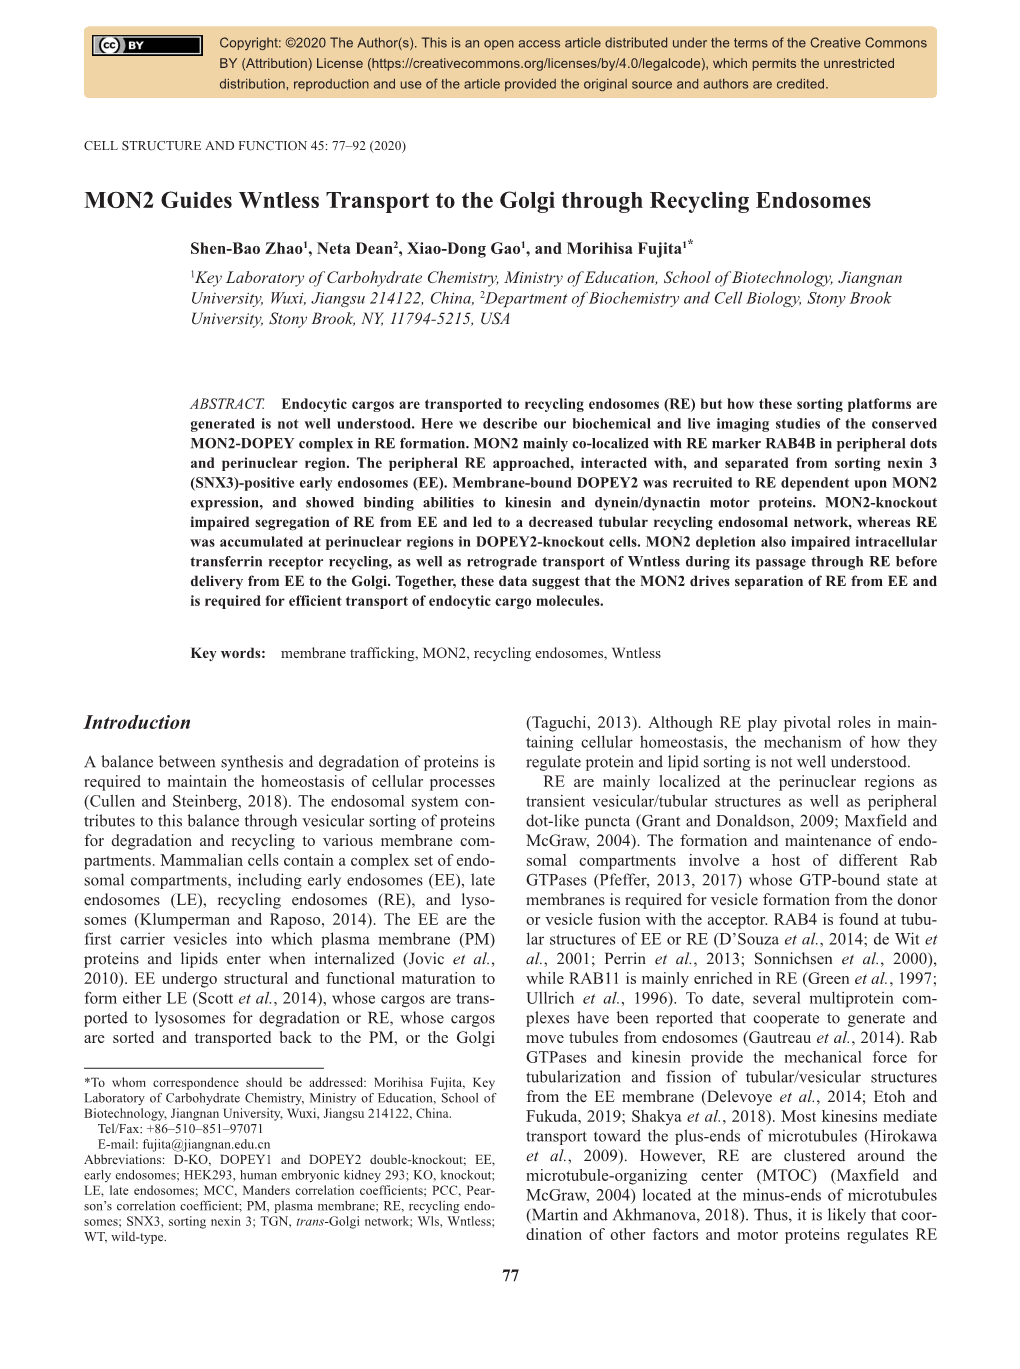 MON2 Guides Wntless Transport to the Golgi Through Recycling Endosomes